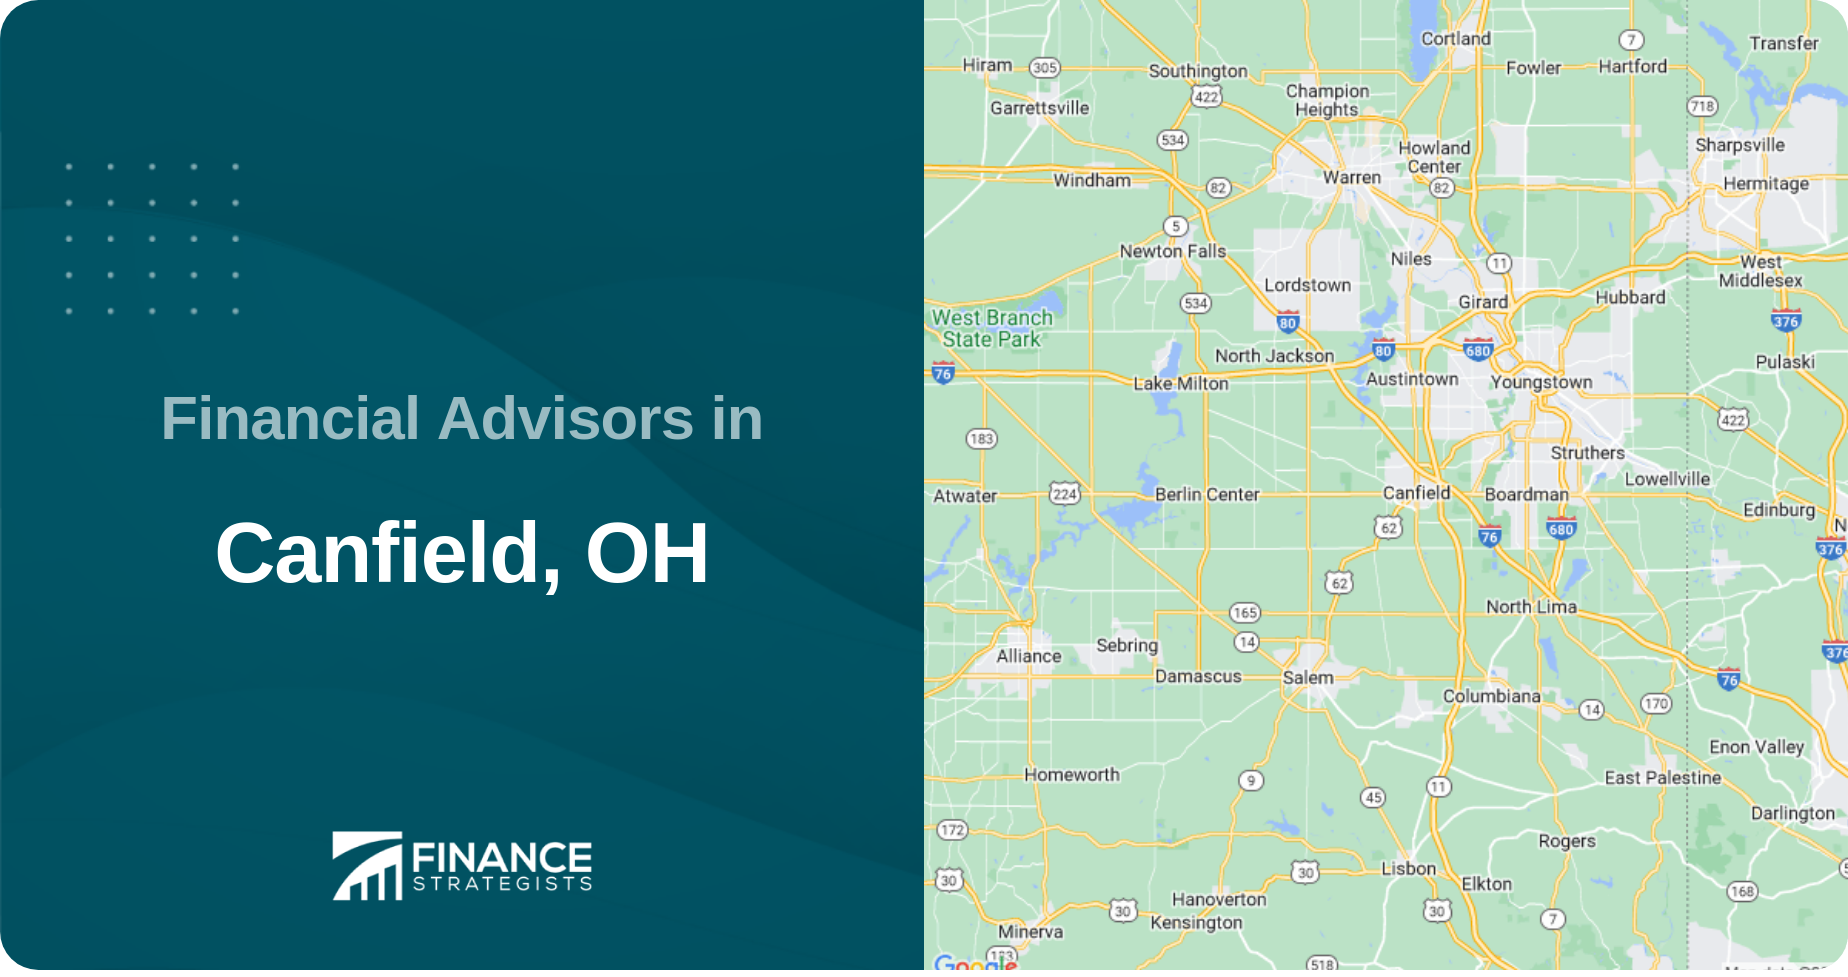 Financial Advisors in Canfield, OH